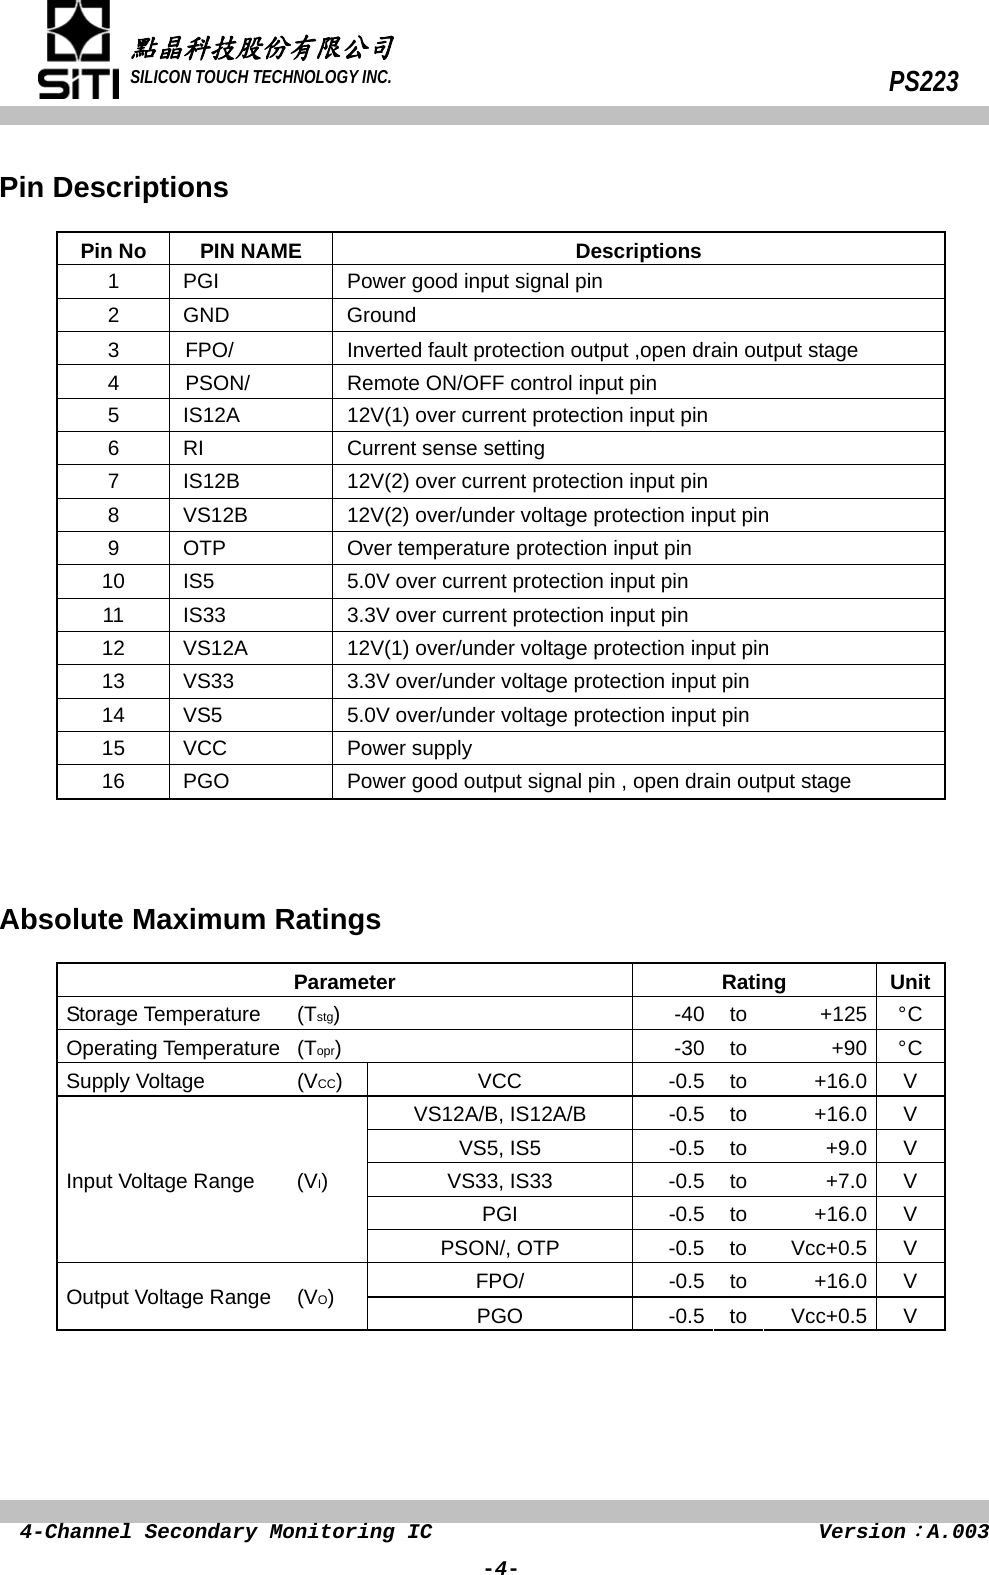 Page 5 of 12 - PS223 - Datasheet. Www.s-manuals.com. Ps222 Ra.003 Silicon Touch